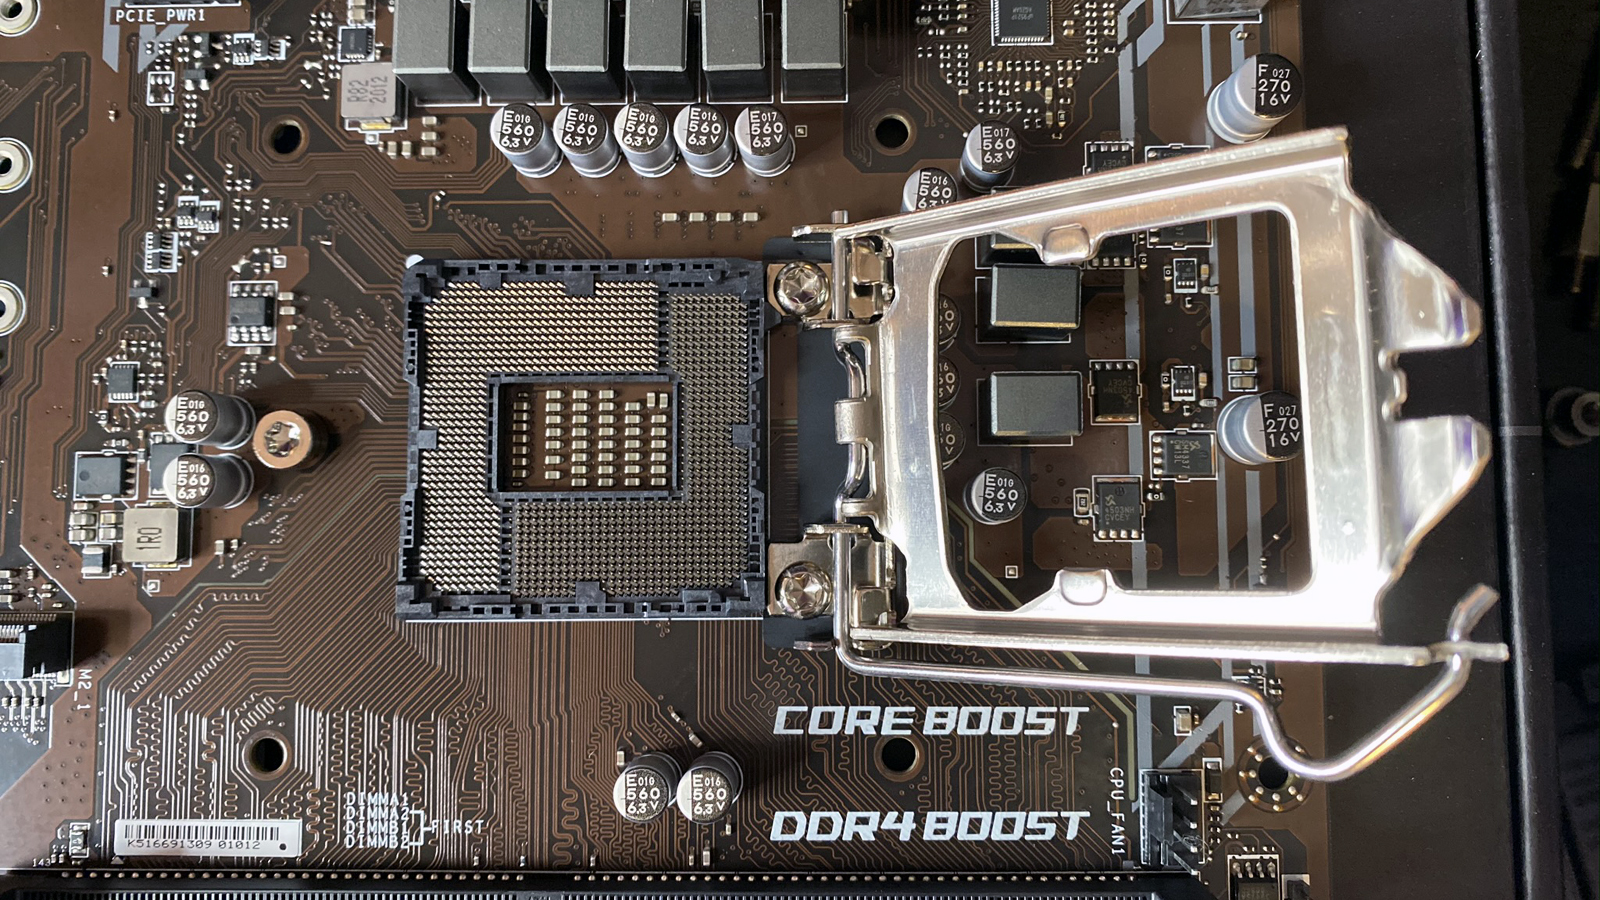 Do not apply thermal paste to anything in this picture!!!! (Photo: Sarah Jacobsson Purewal)